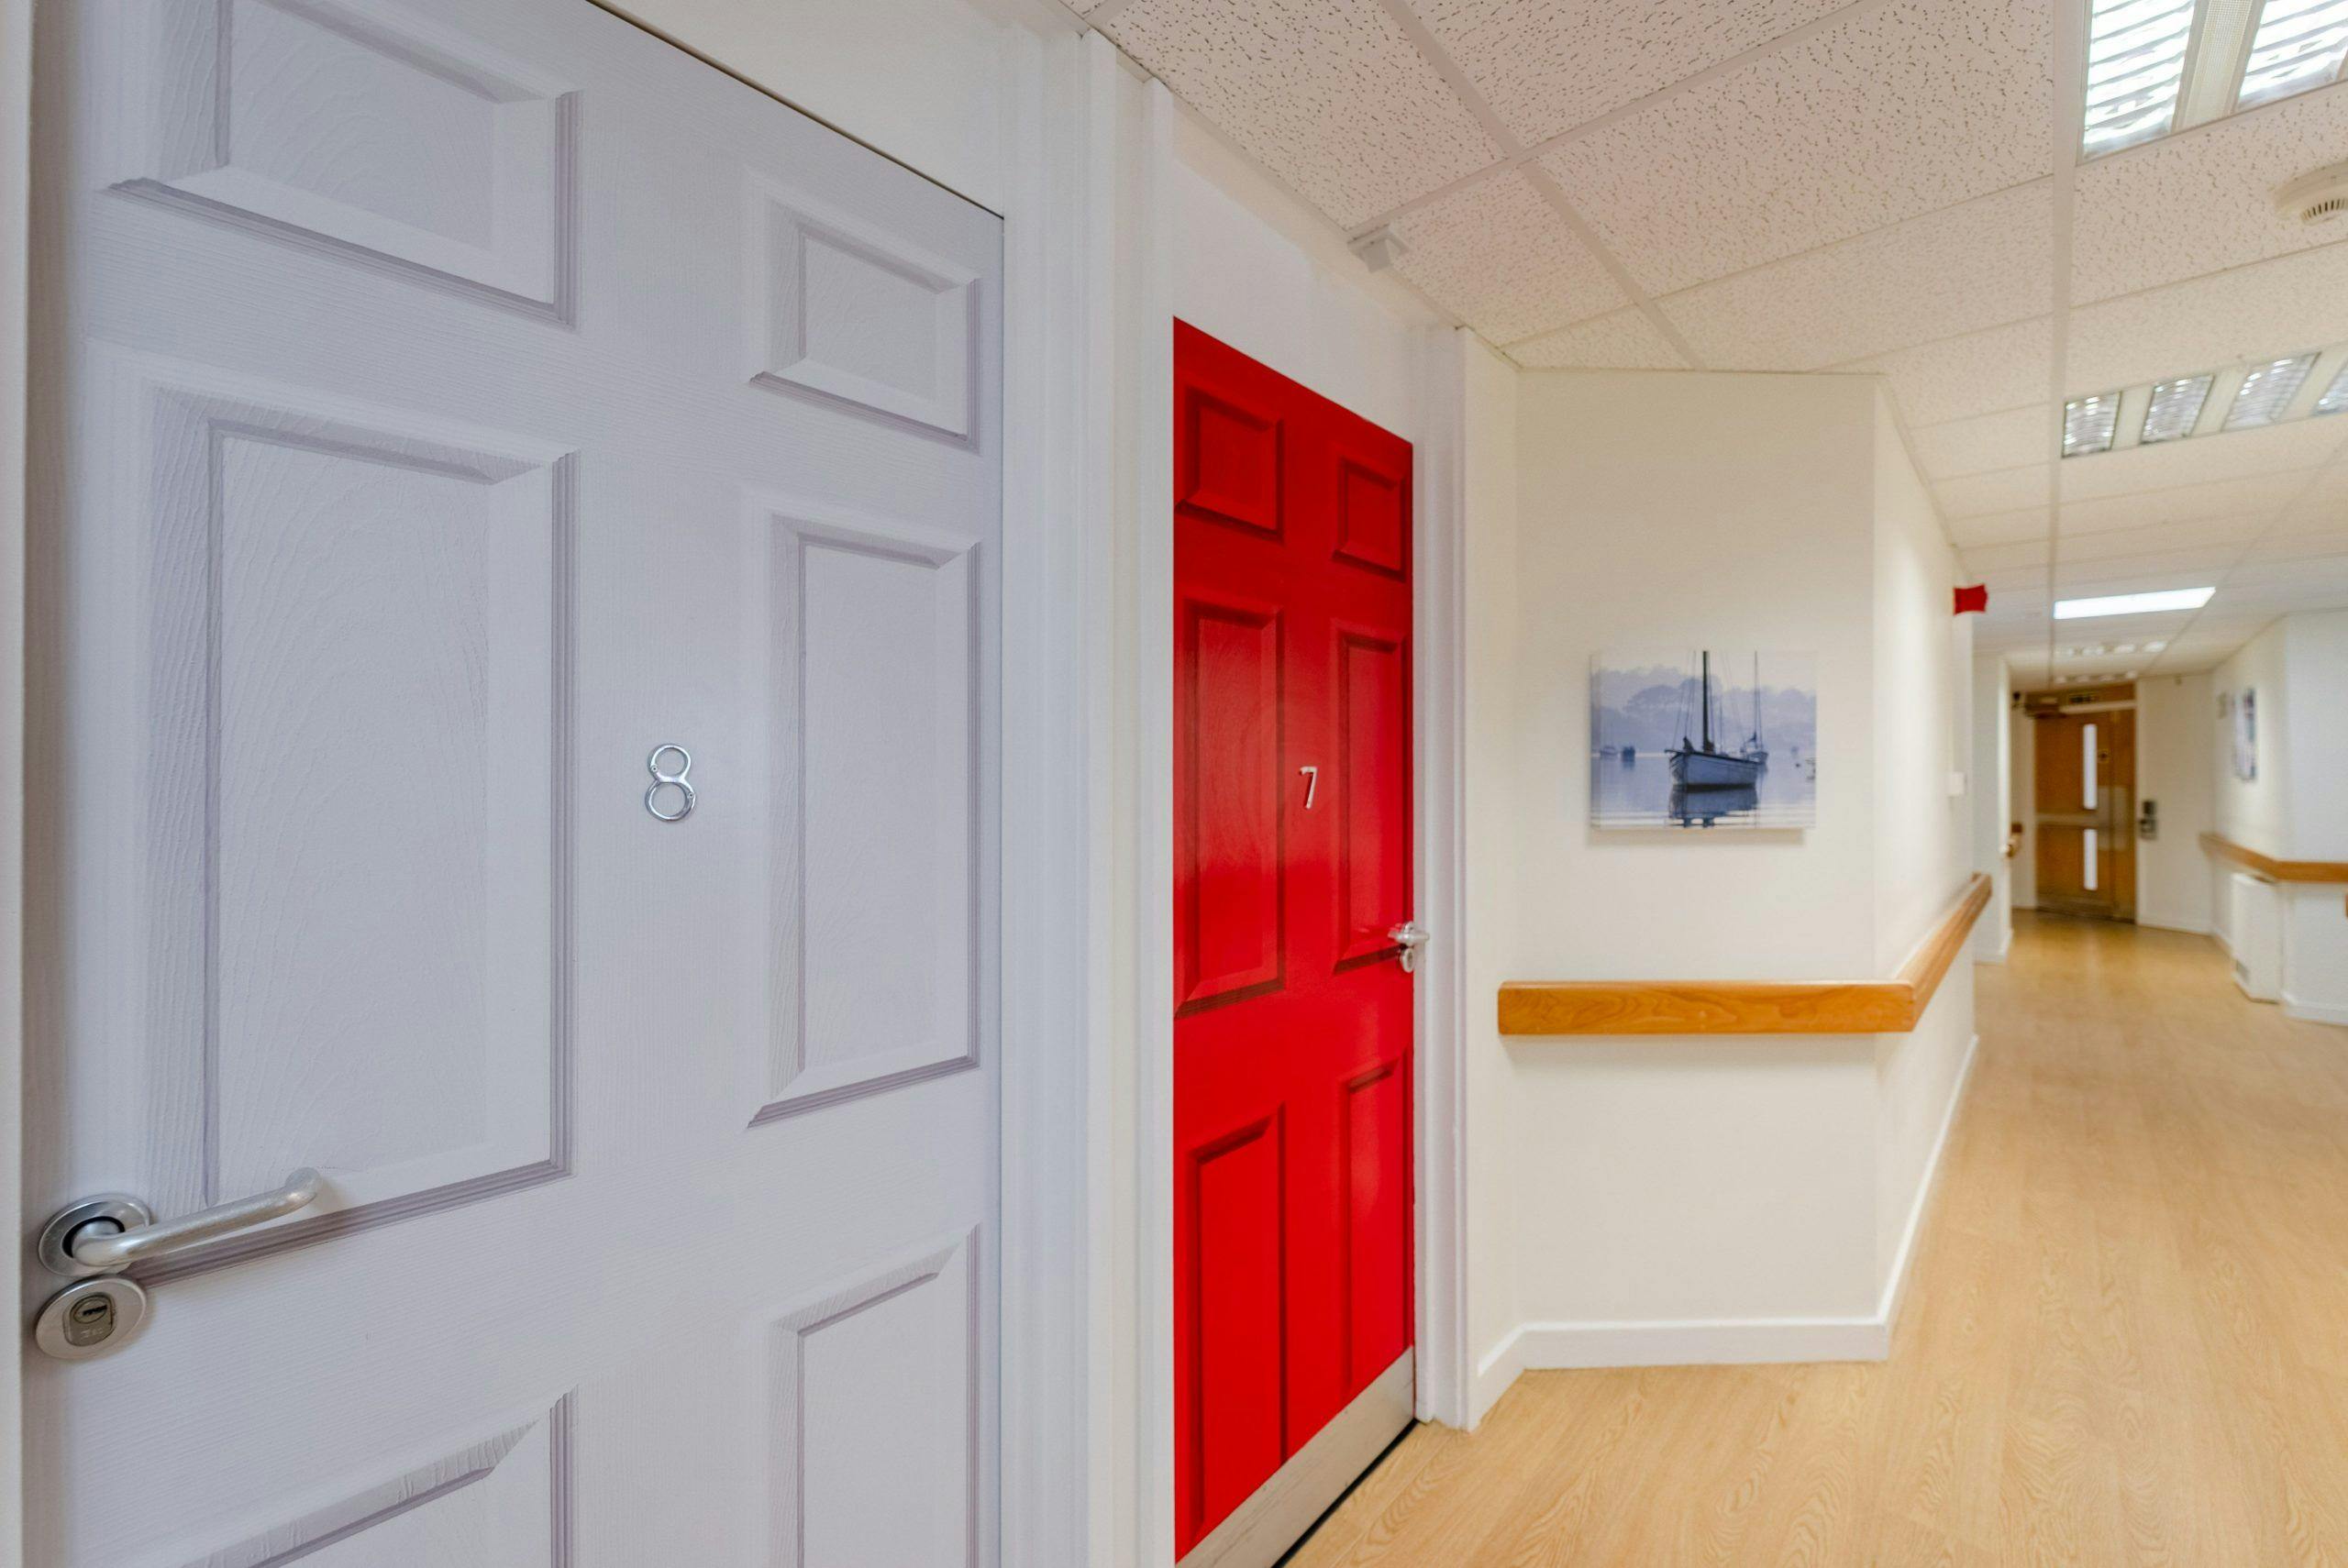 Hallway of Vera James House care home in Ely, Cambridgeshire